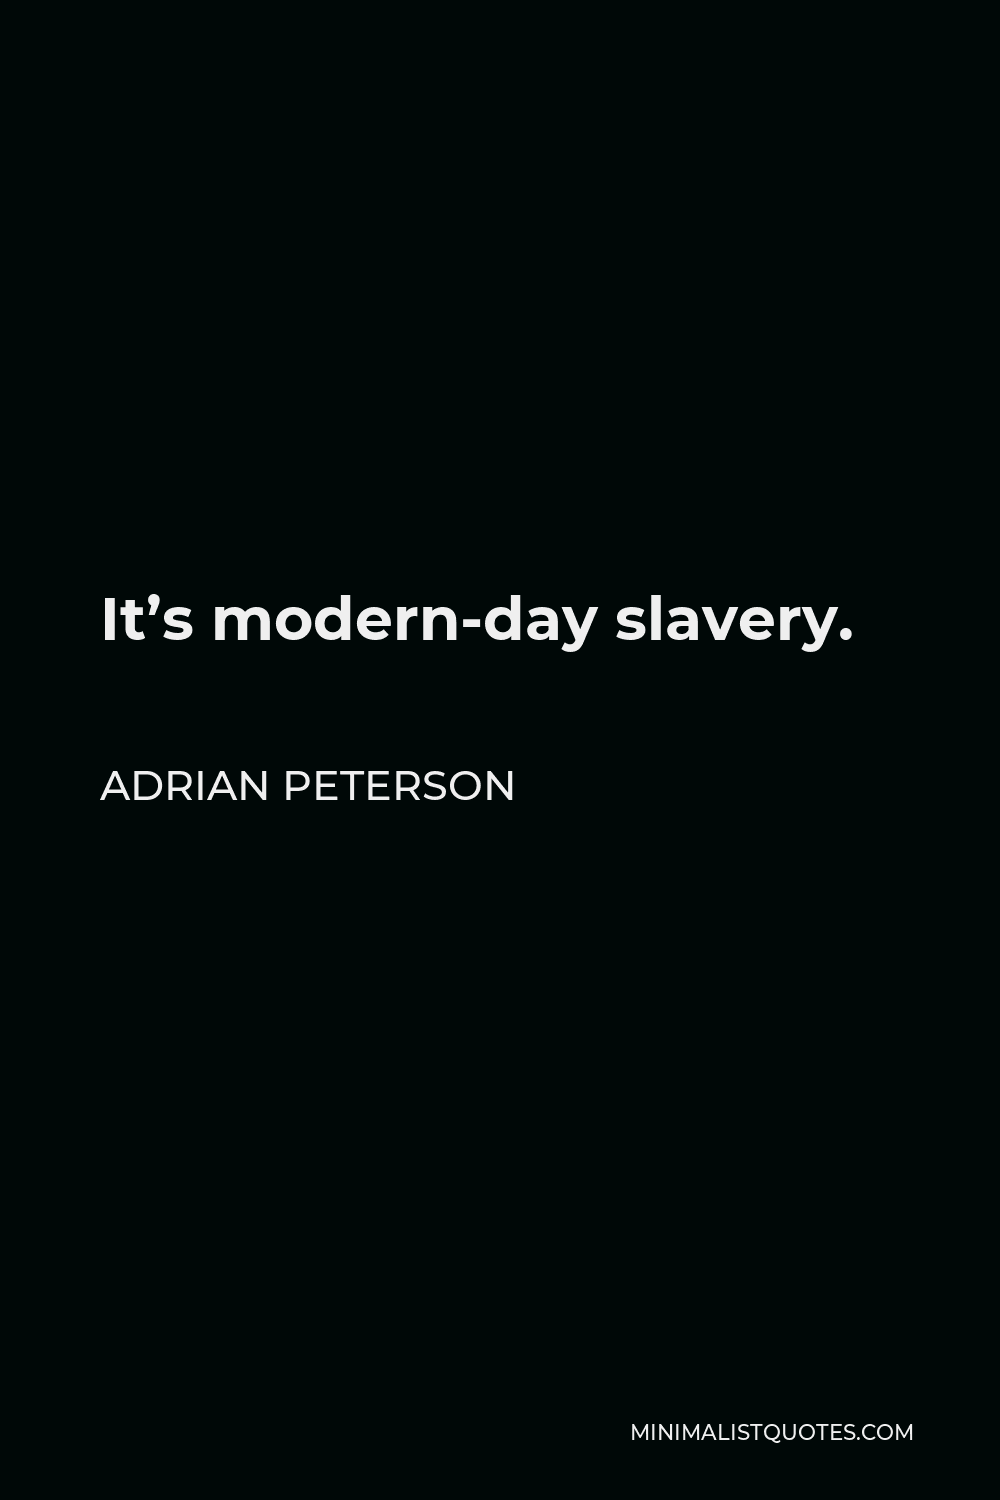 Adrian Peterson Quote - It’s modern-day slavery.